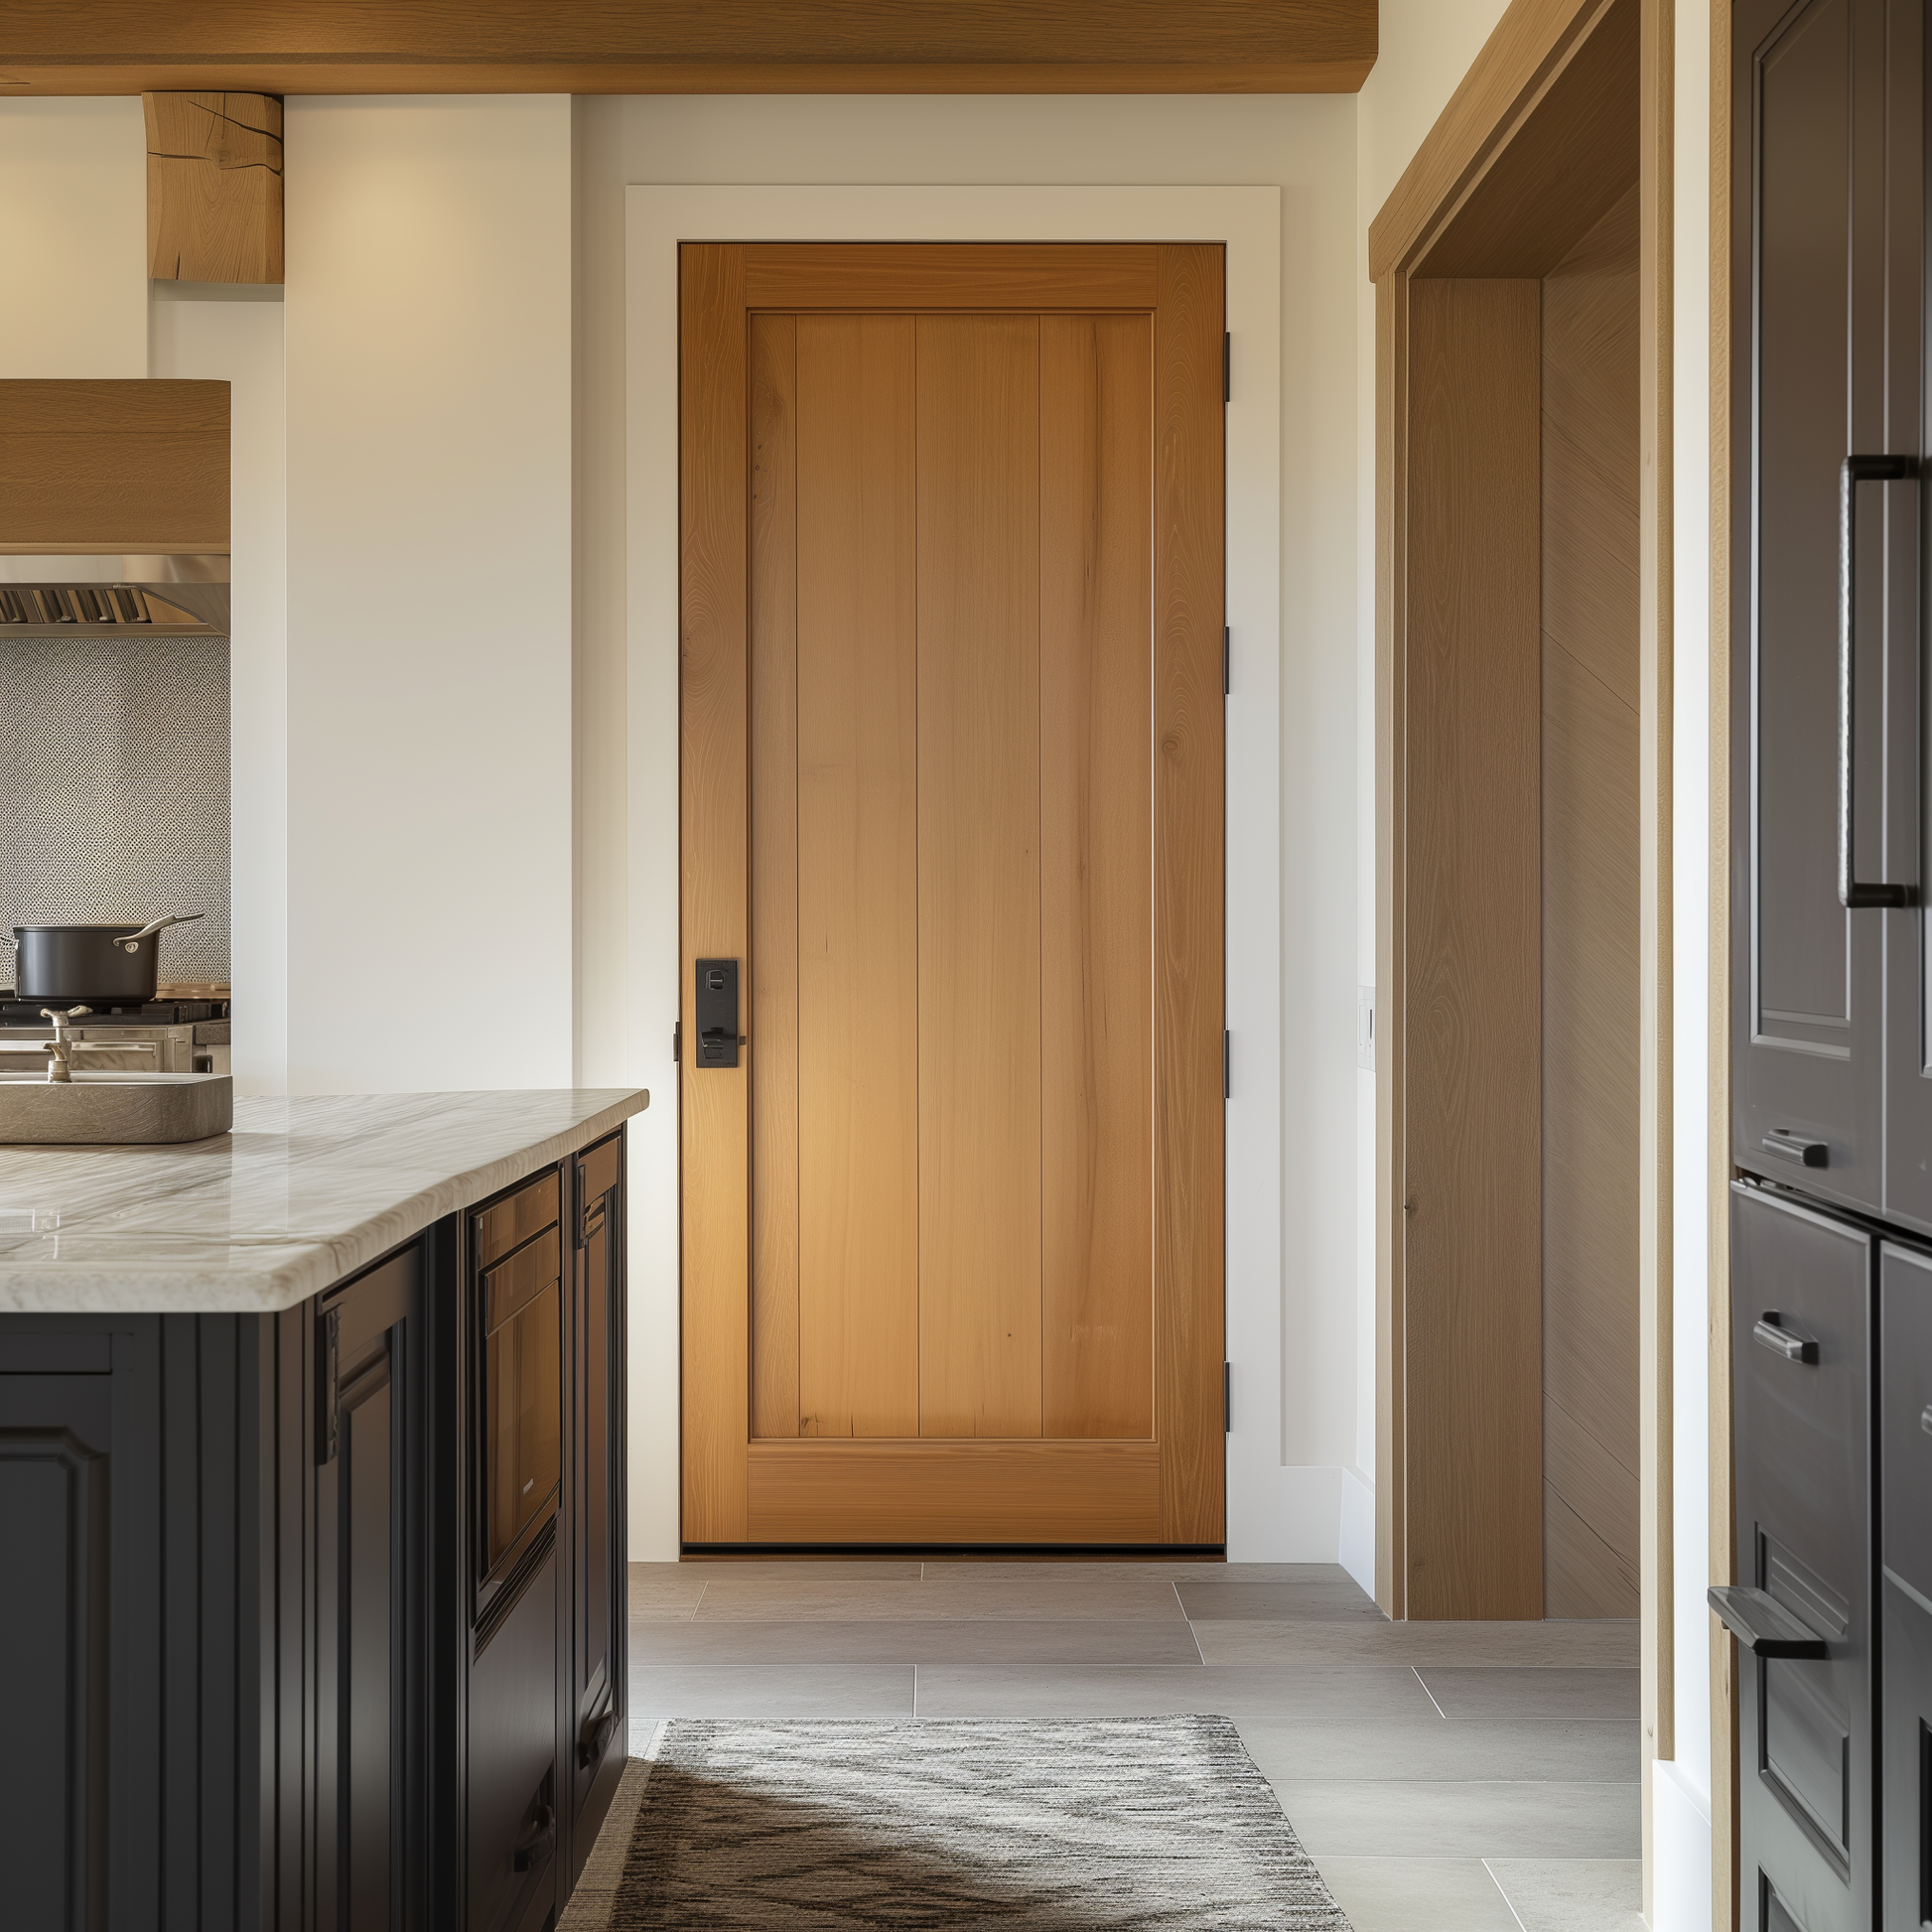 solid white oak interior door, bespoke fully customizable and custom built to order handcrafted from solid white oak. Pictured in a kitchen with dark blue grey cabinets and white walls